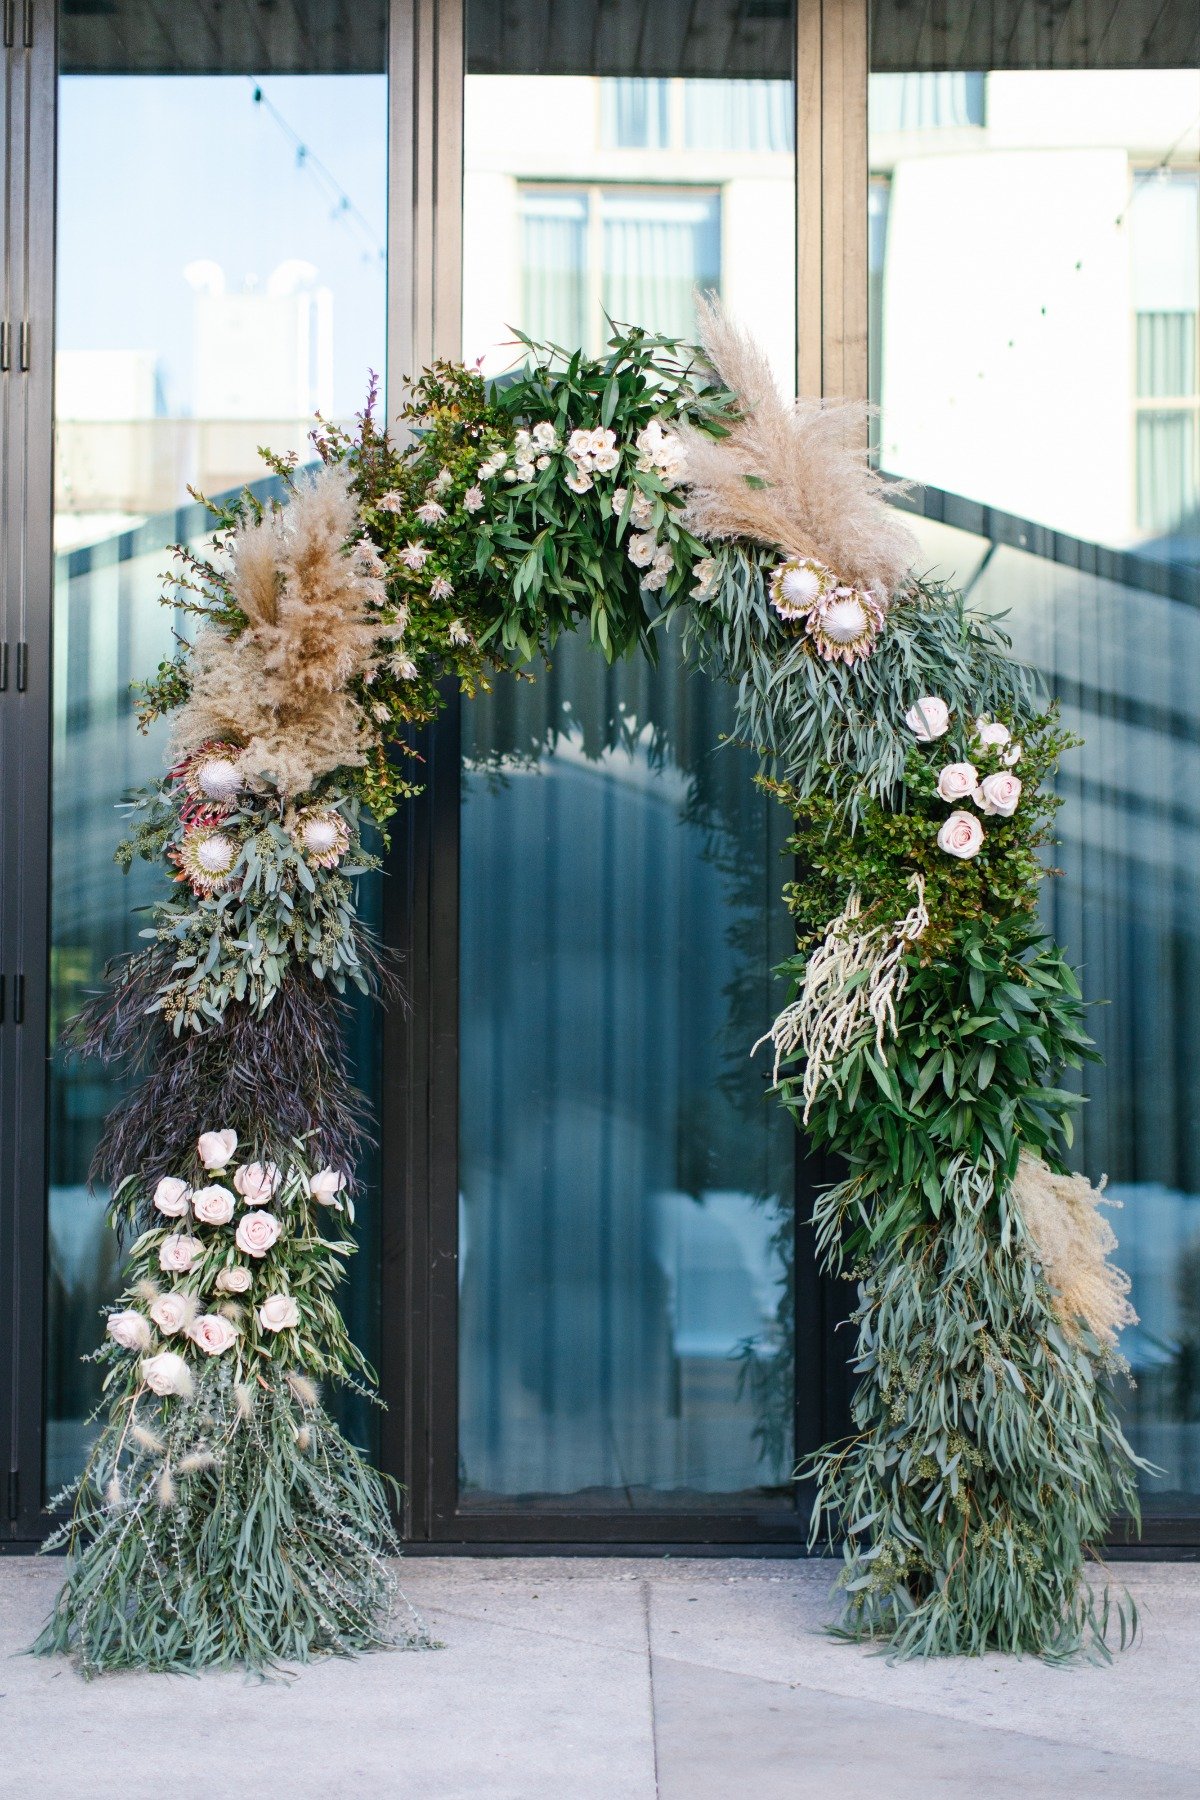 Wedding arch decorated with eucalyptus, protea and paps grass